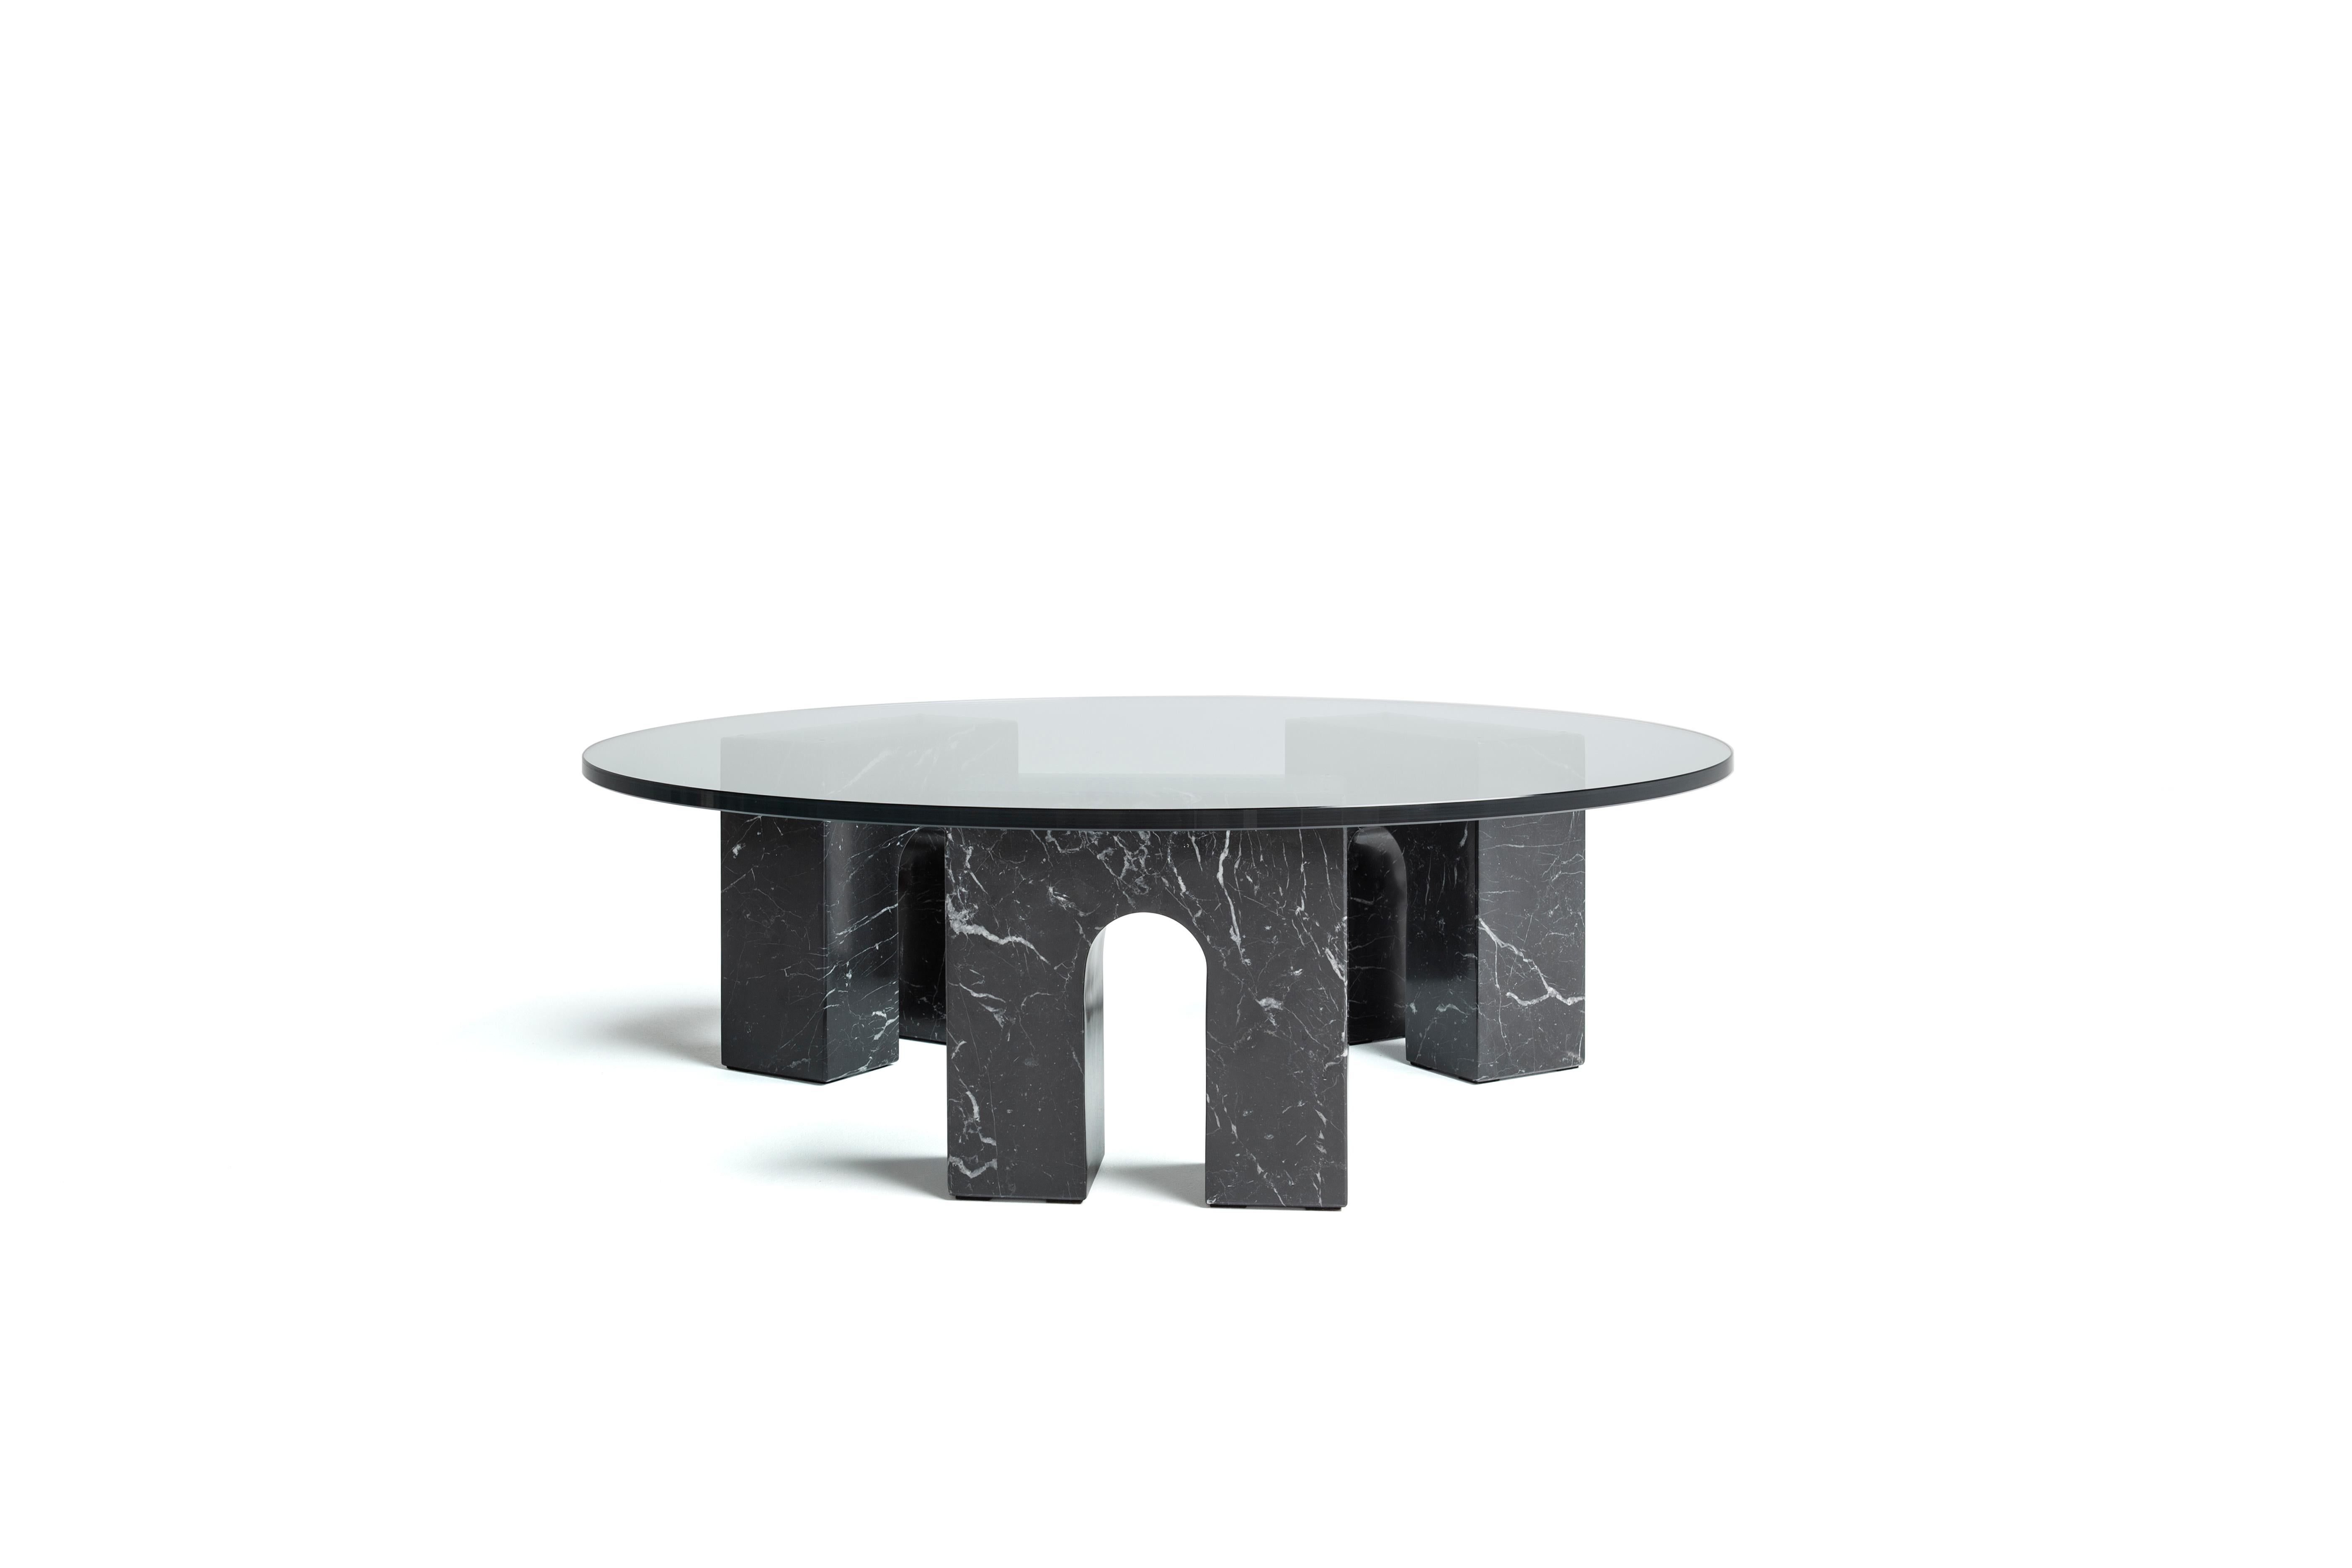 Spanish “Arch Table” White Carrara Marble and Glass Minimalist Coffee Table For Sale